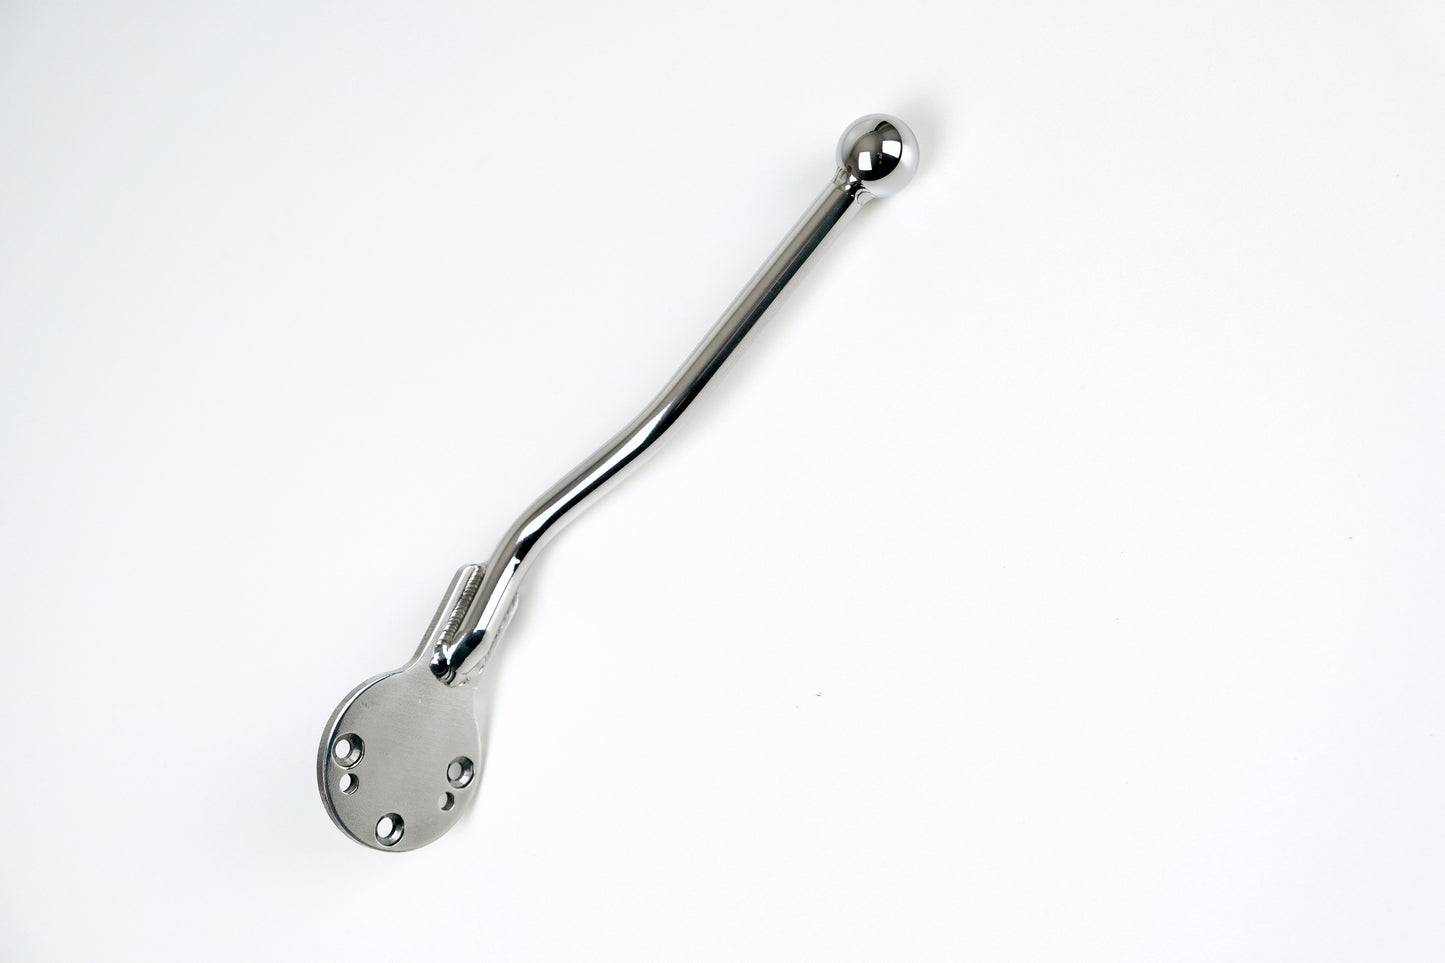 Stainless jockey shifter / suicide shifter with ball top